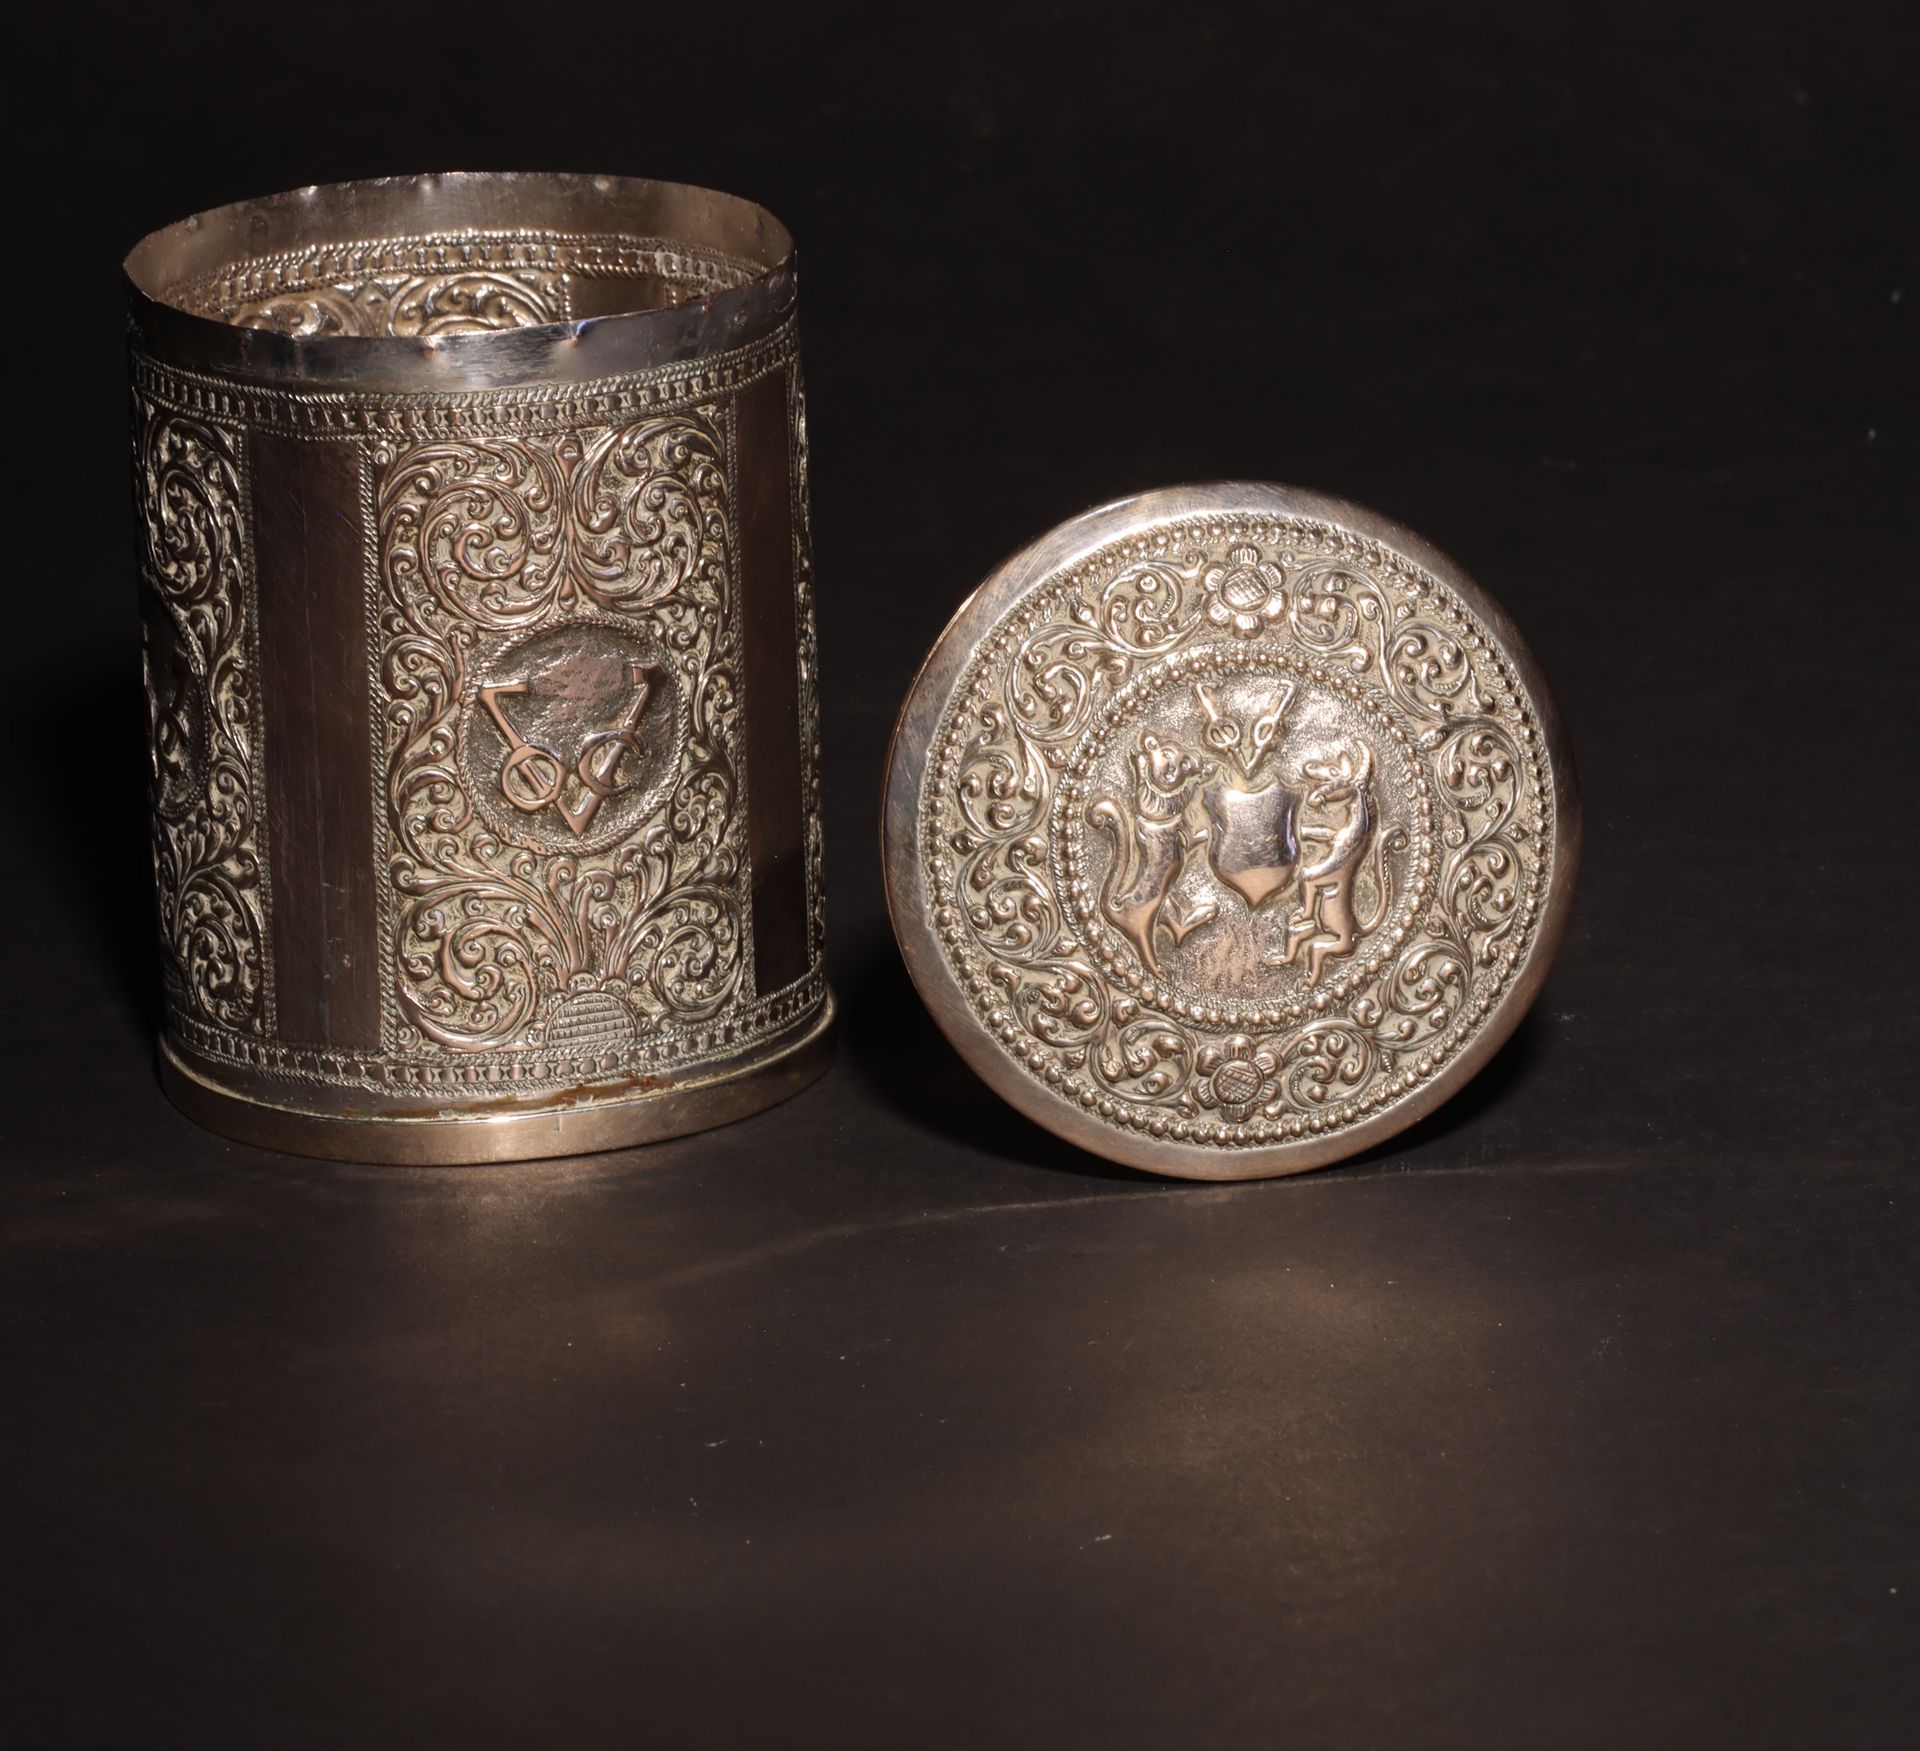 An Antique South Asian Cylindrical Silver Casket with Domed Lid 一个古旧的南亚圆柱形银匣和圆顶盖&hellip;